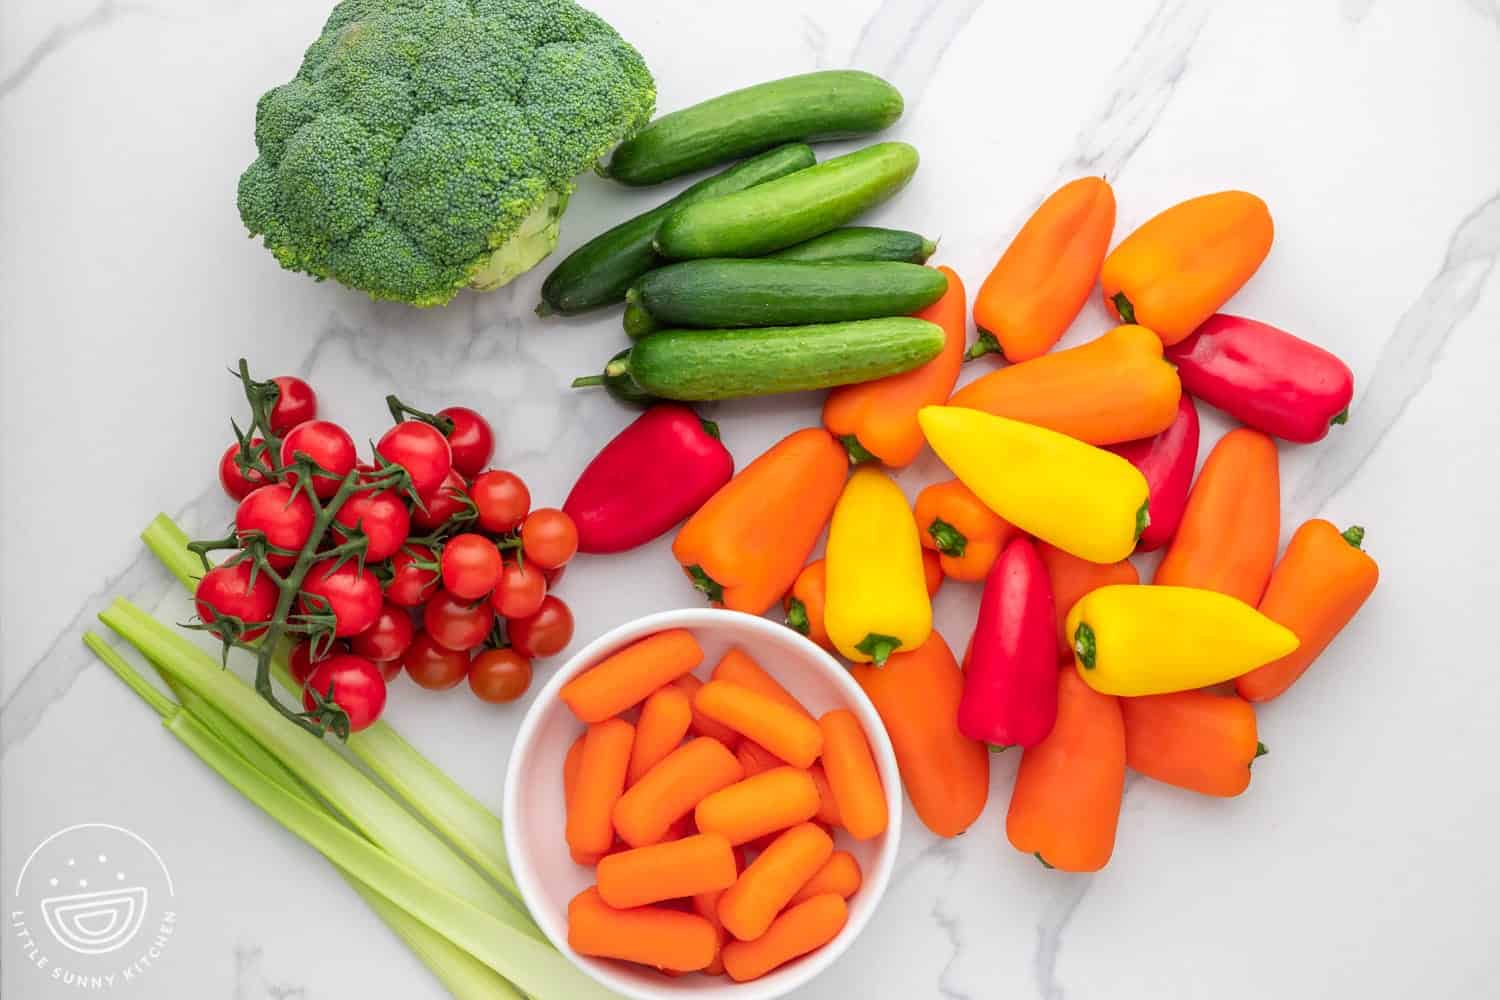 The ingredients needed to make a colorful veggie dip platter.